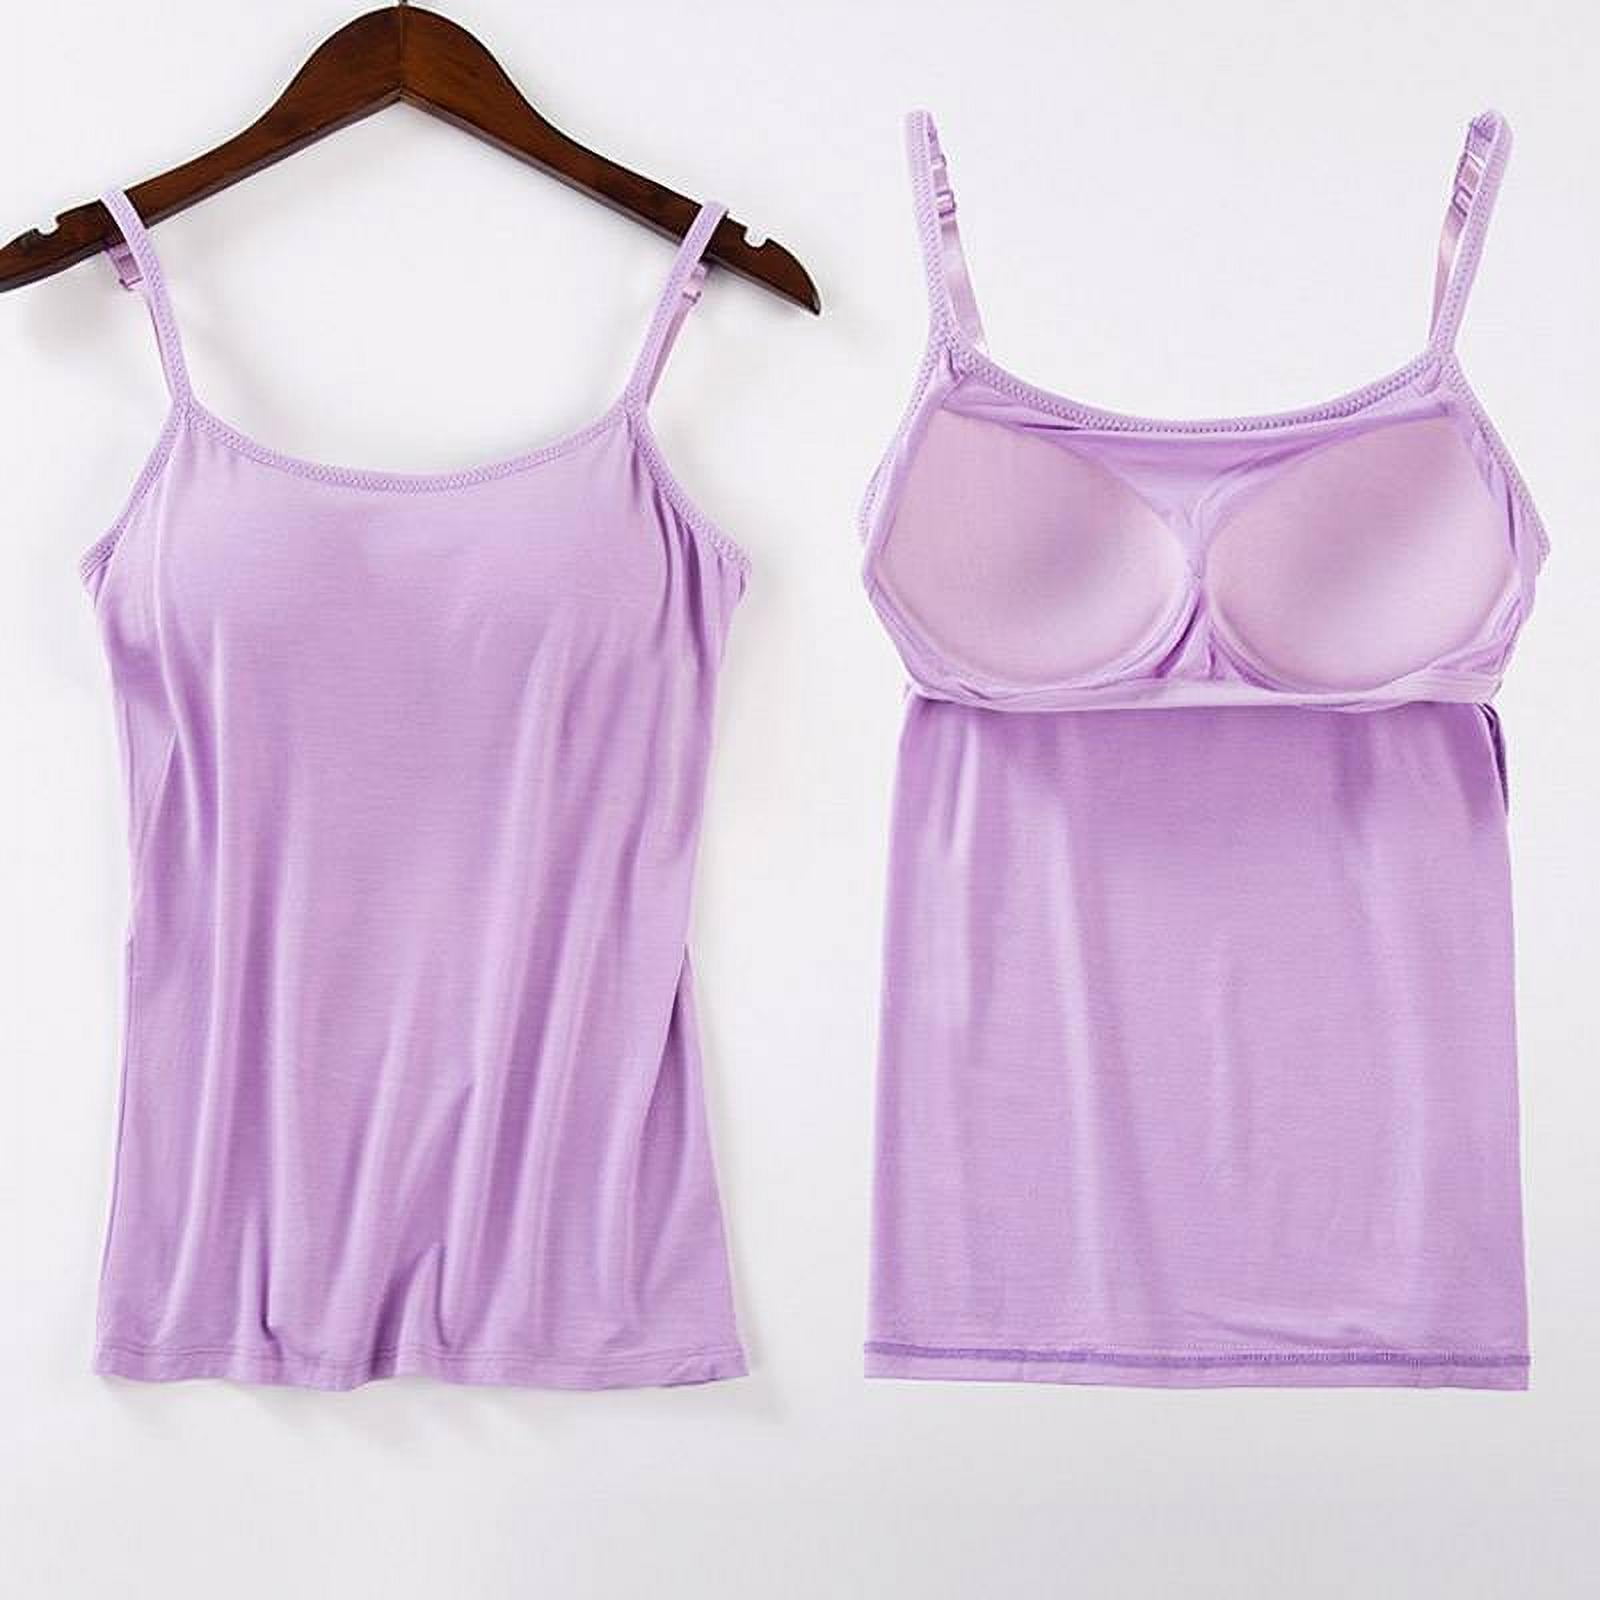 V FOR CITY Tank Top for Women with Built-in Padded Bra Adjustable Wide  Strap Camisole Cotton Cami Shirts